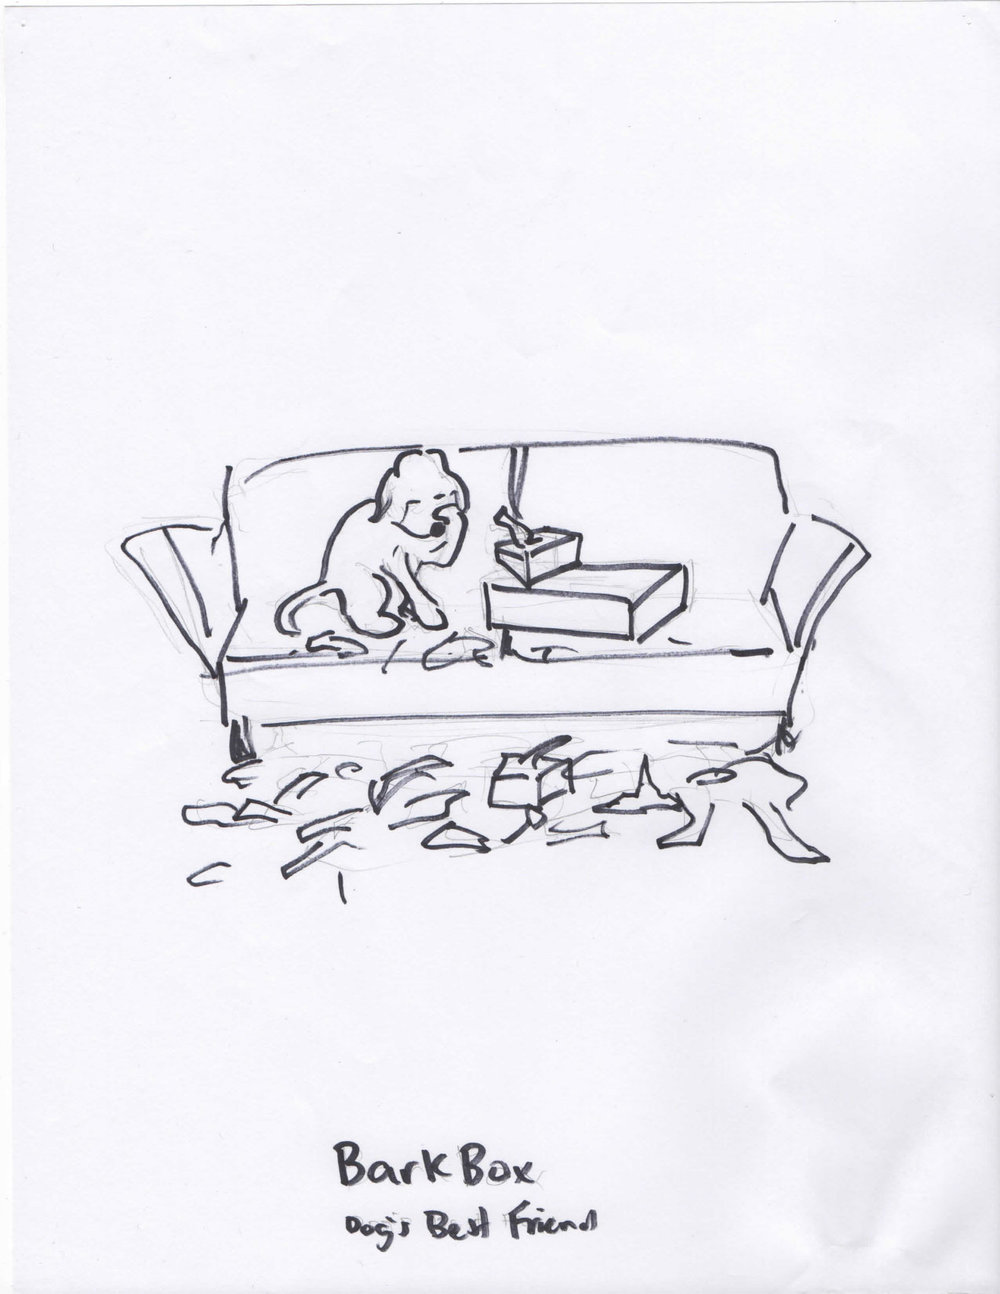 Pencil sketch of a dog crying on couch with a barkbox handing over a box of tissues